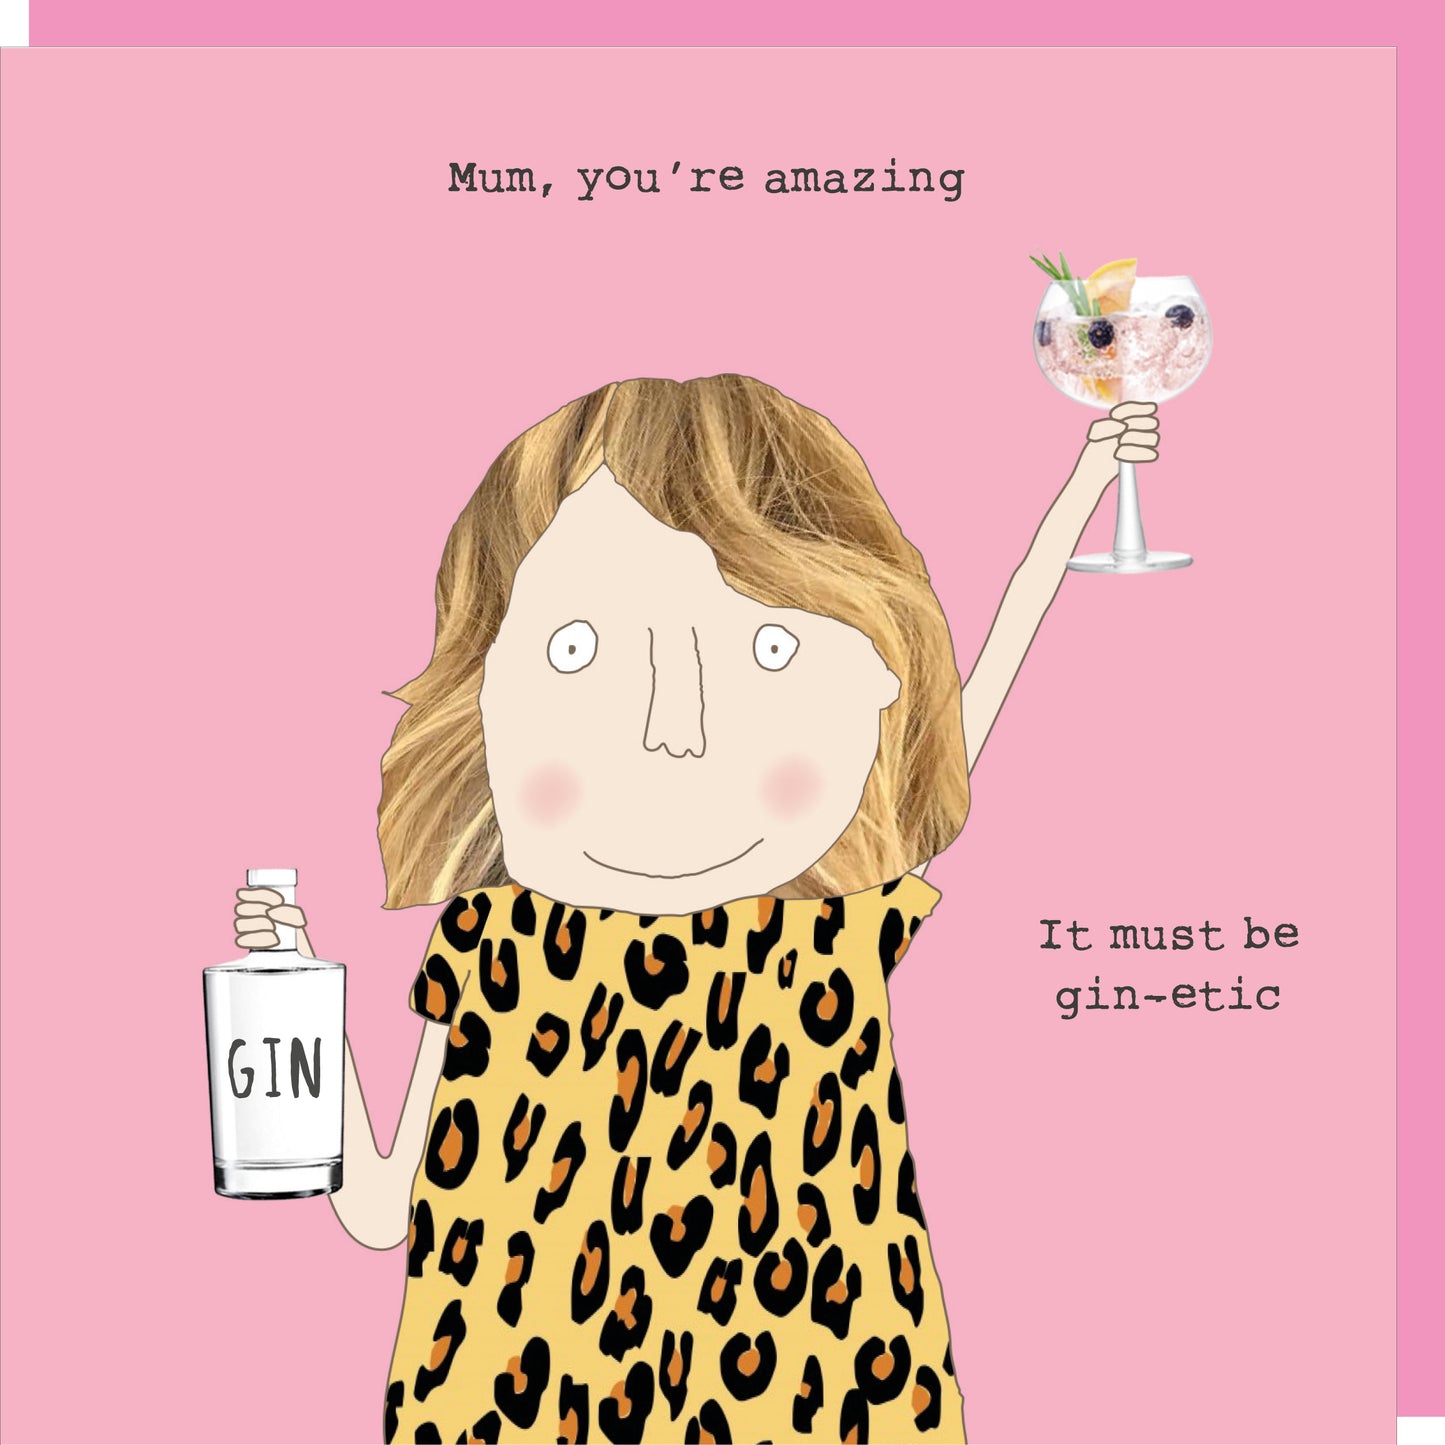 Rosie Made A Thing Mum You're Amazing Gin Mother's Day Funny Greeting Card